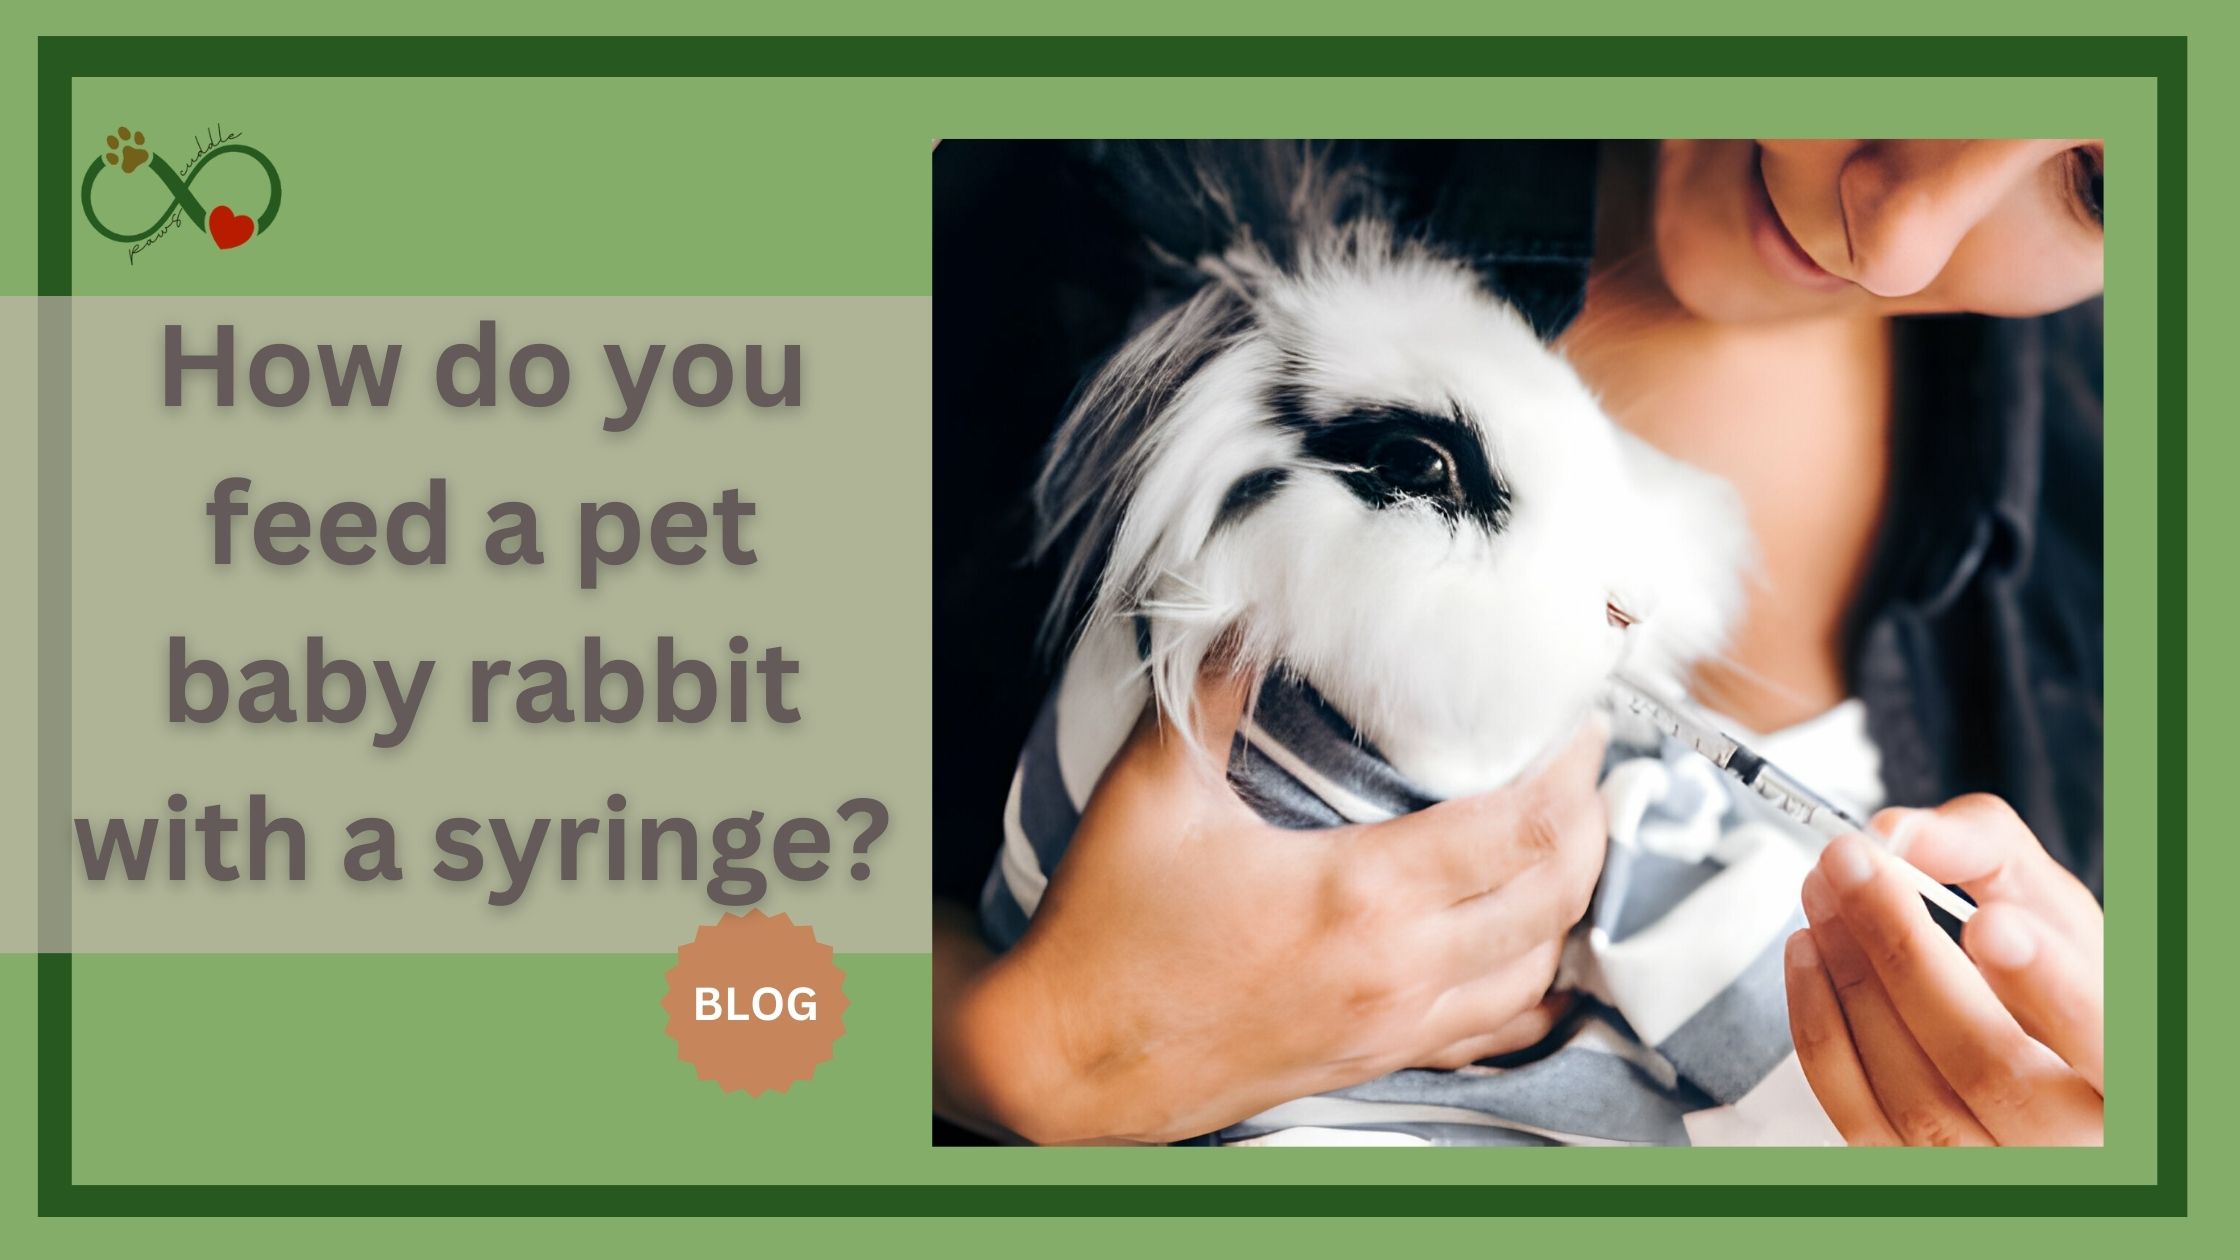 How do you feed a pet baby rabbit with a syringe?